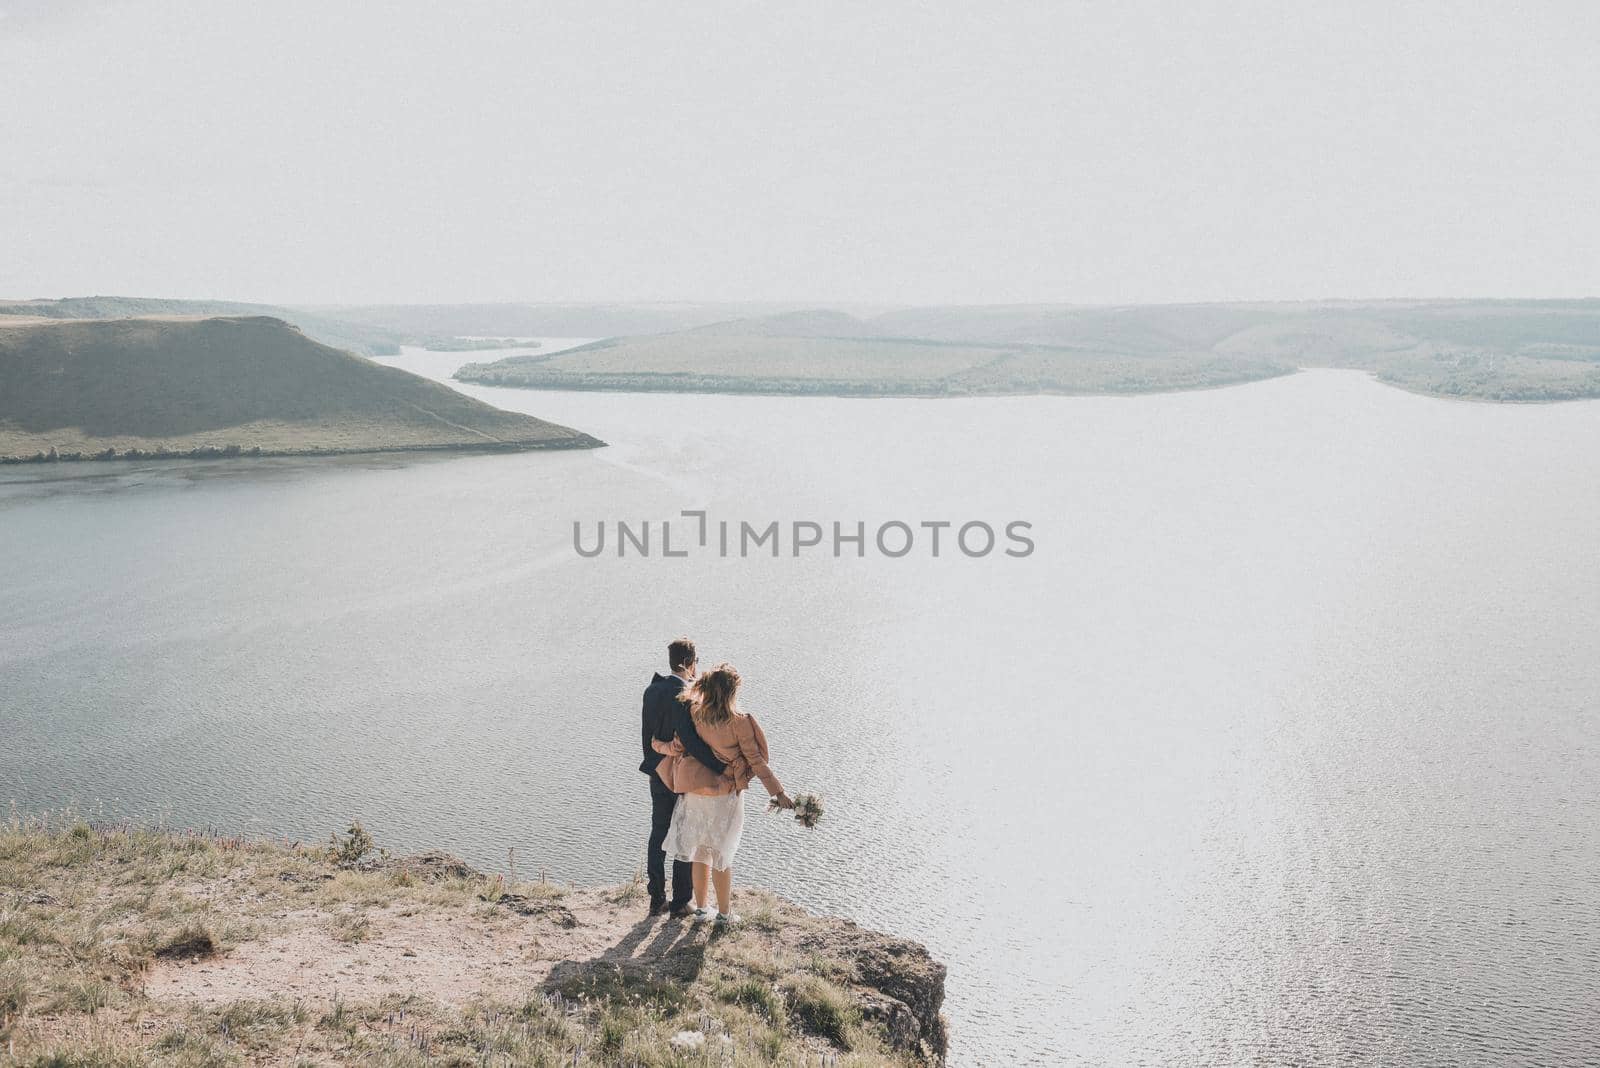 The groom and bride in wedding dress stand on a cliff in front of a large reservoir in distance are islands. Warm sunny summer weather. Spring green grass.A girl in a pink jacket holds a bouquet.